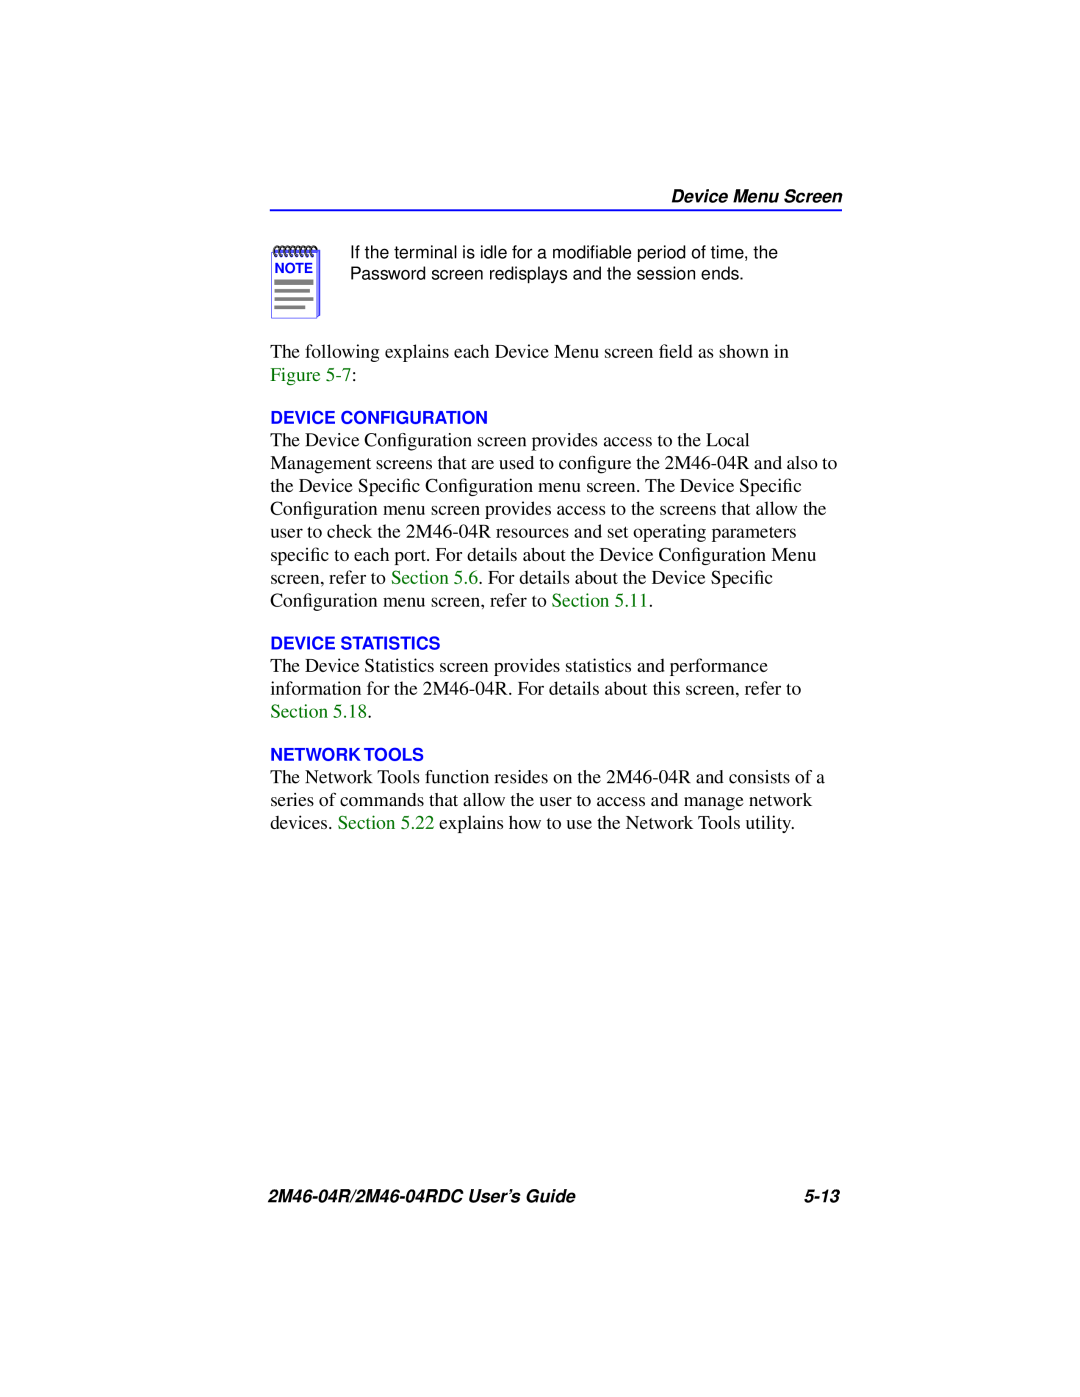 Cabletron Systems pmn manual Device Configuration, Device Statistics, Network Tools 